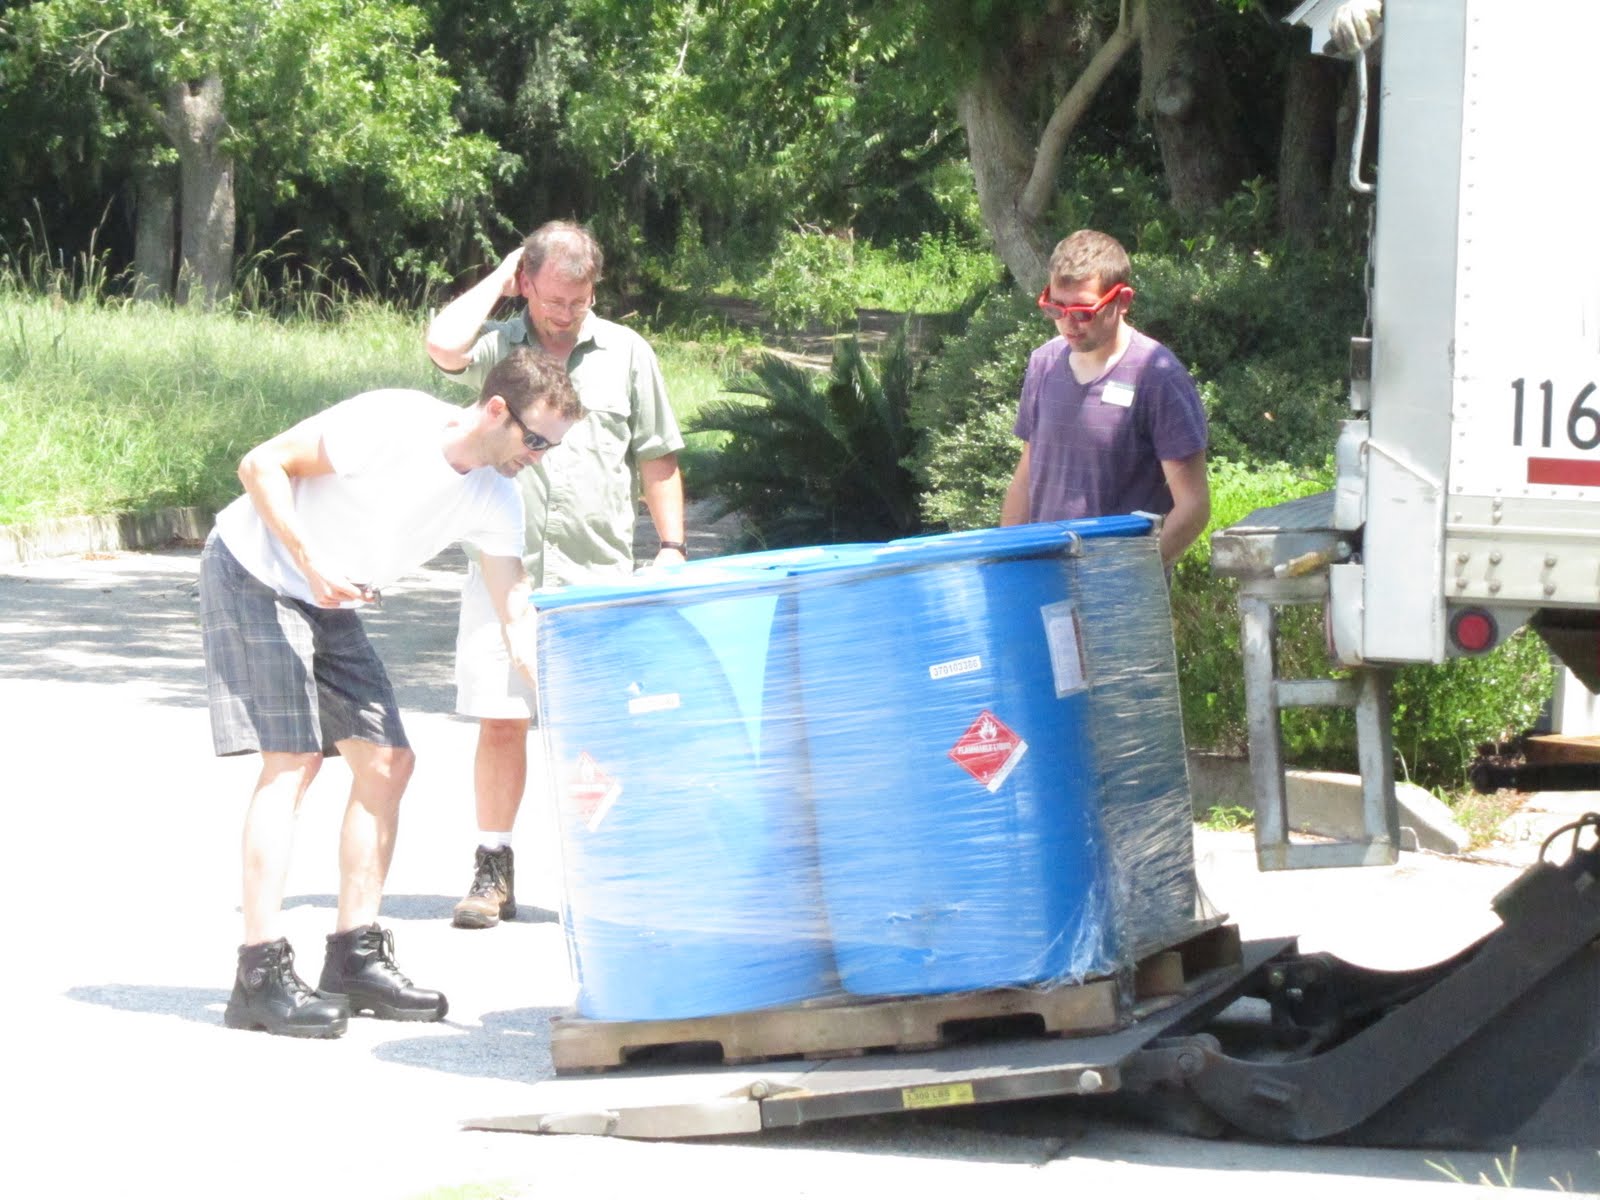 Rob, John, and Randy unloading 4 blue 55 gallon drums from a wooden pallet